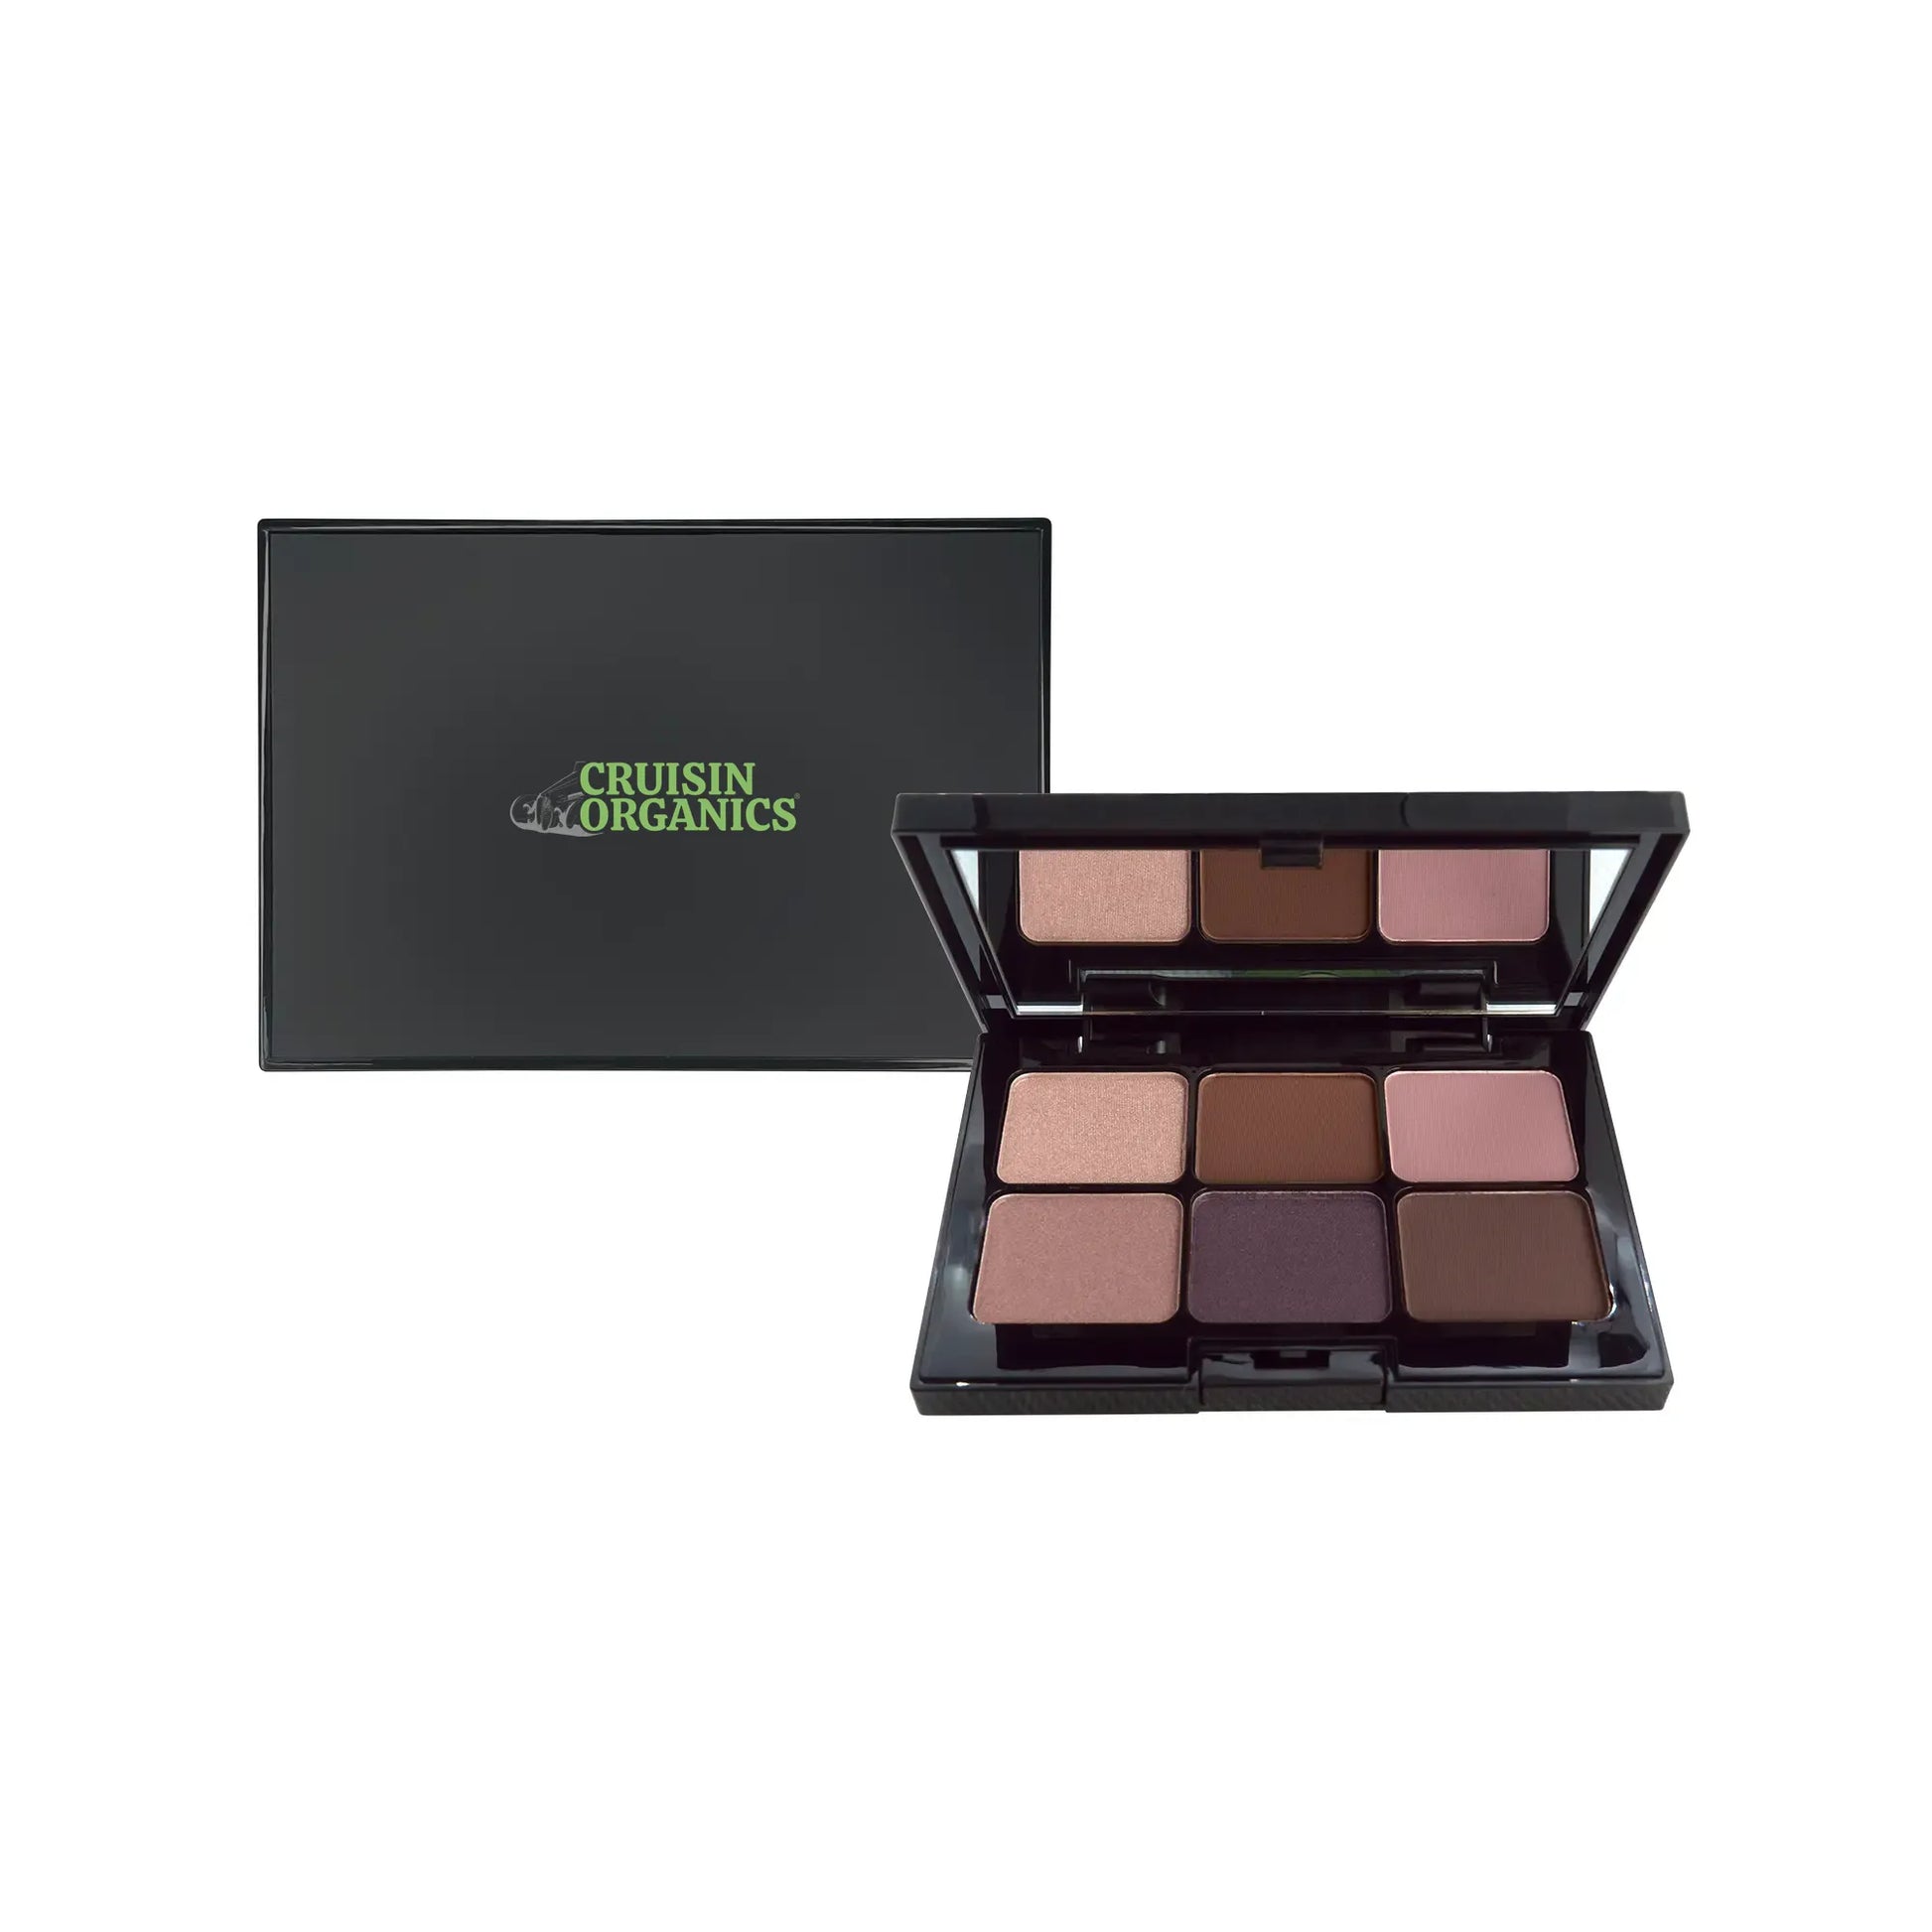 The Sweet Almond Eyeshadow Palette by Cruisin Organics is available. easily layered in many color colors and cream textures. intensely colored, with dazzling finishes that endure and give off a glowing, velvety appearance. Applying it smoothly and gently protects the delicate area around the eyes.